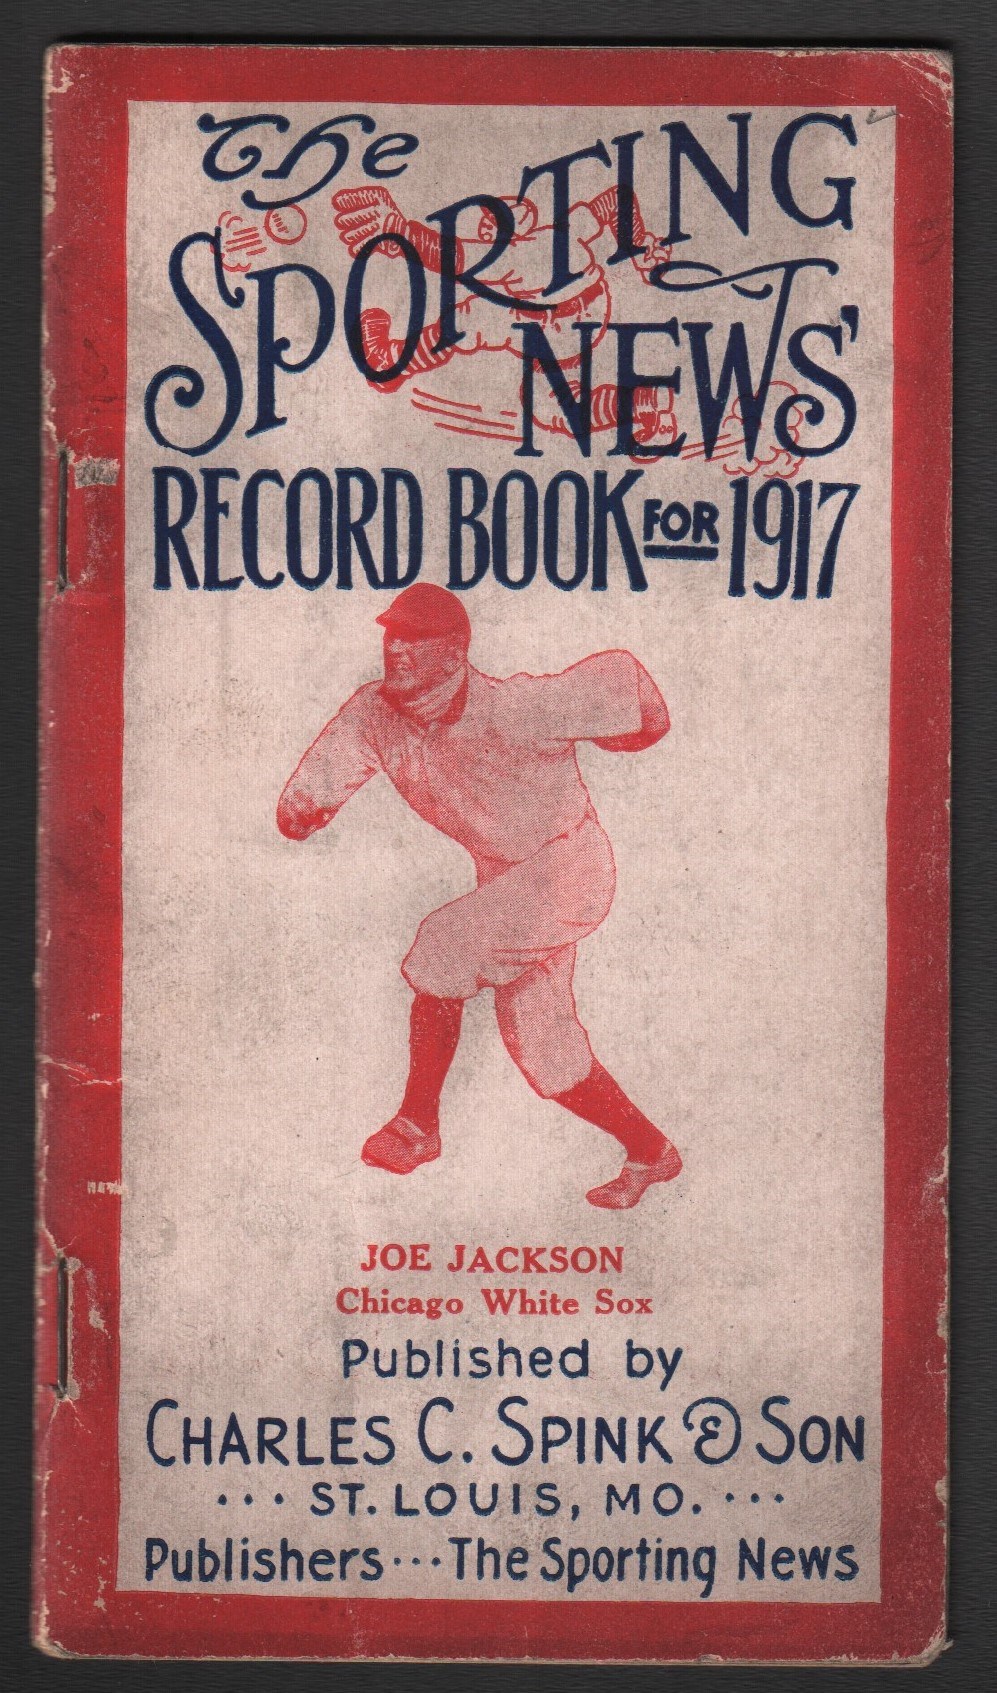 Tickets, Publications & Pins - RARE Sporting News 1917 Record Book with Joe Jackson Cover